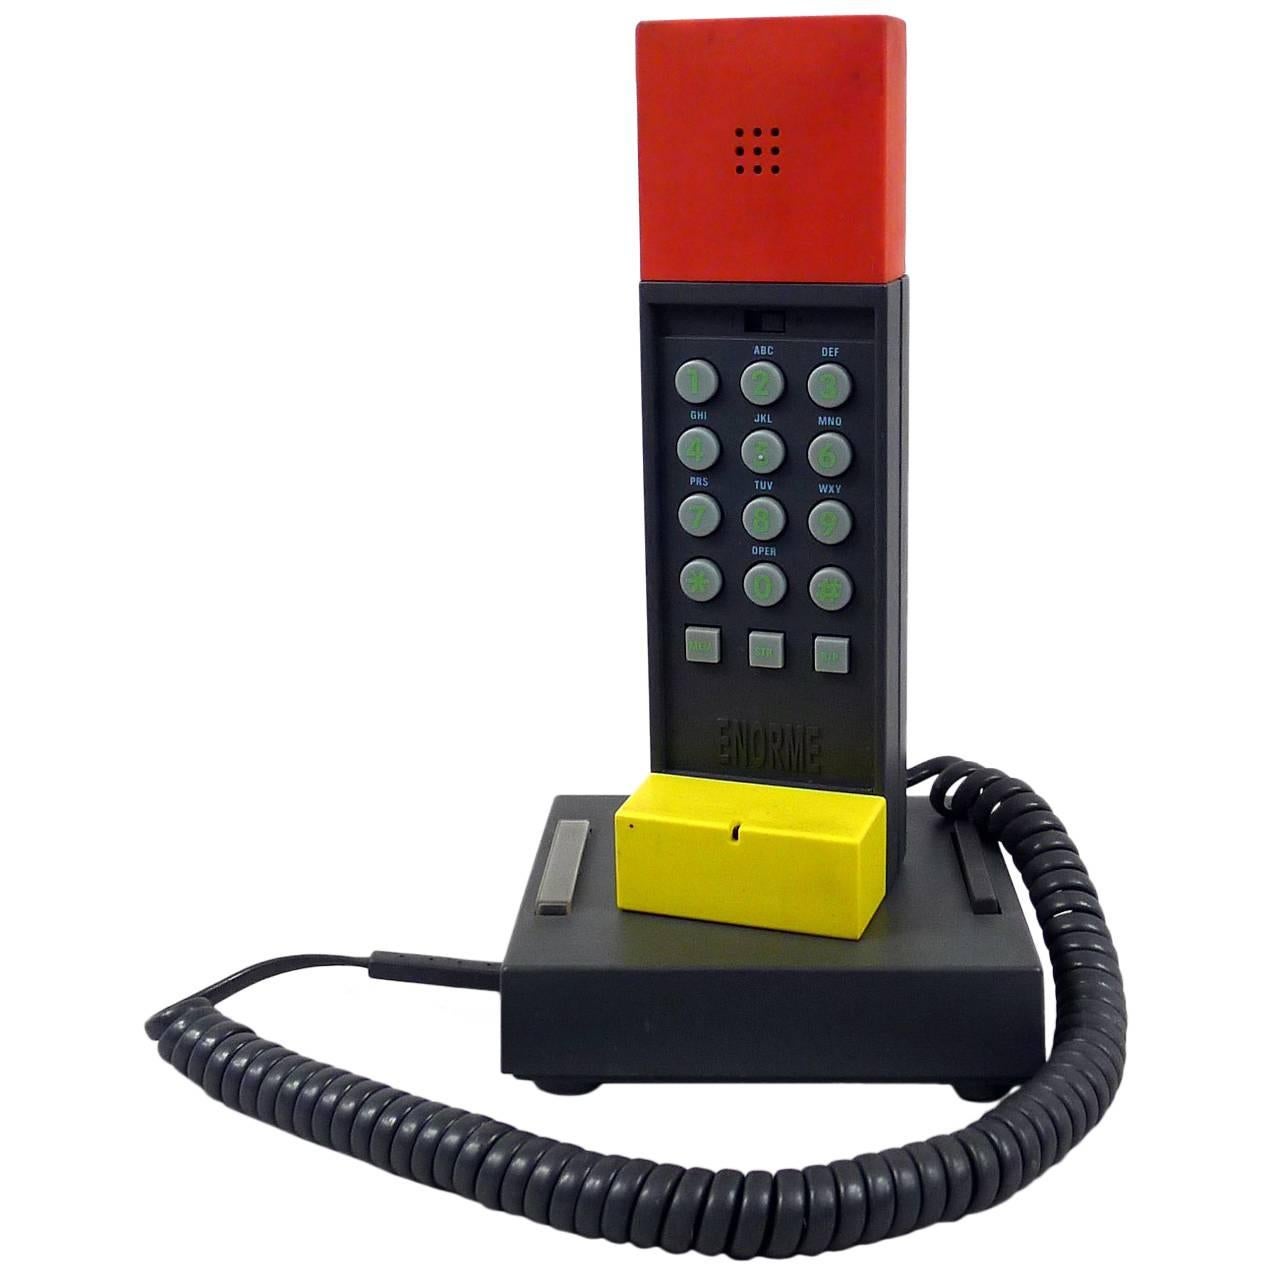 Ettore Sottsass "Enorme" Telephone  For Sale